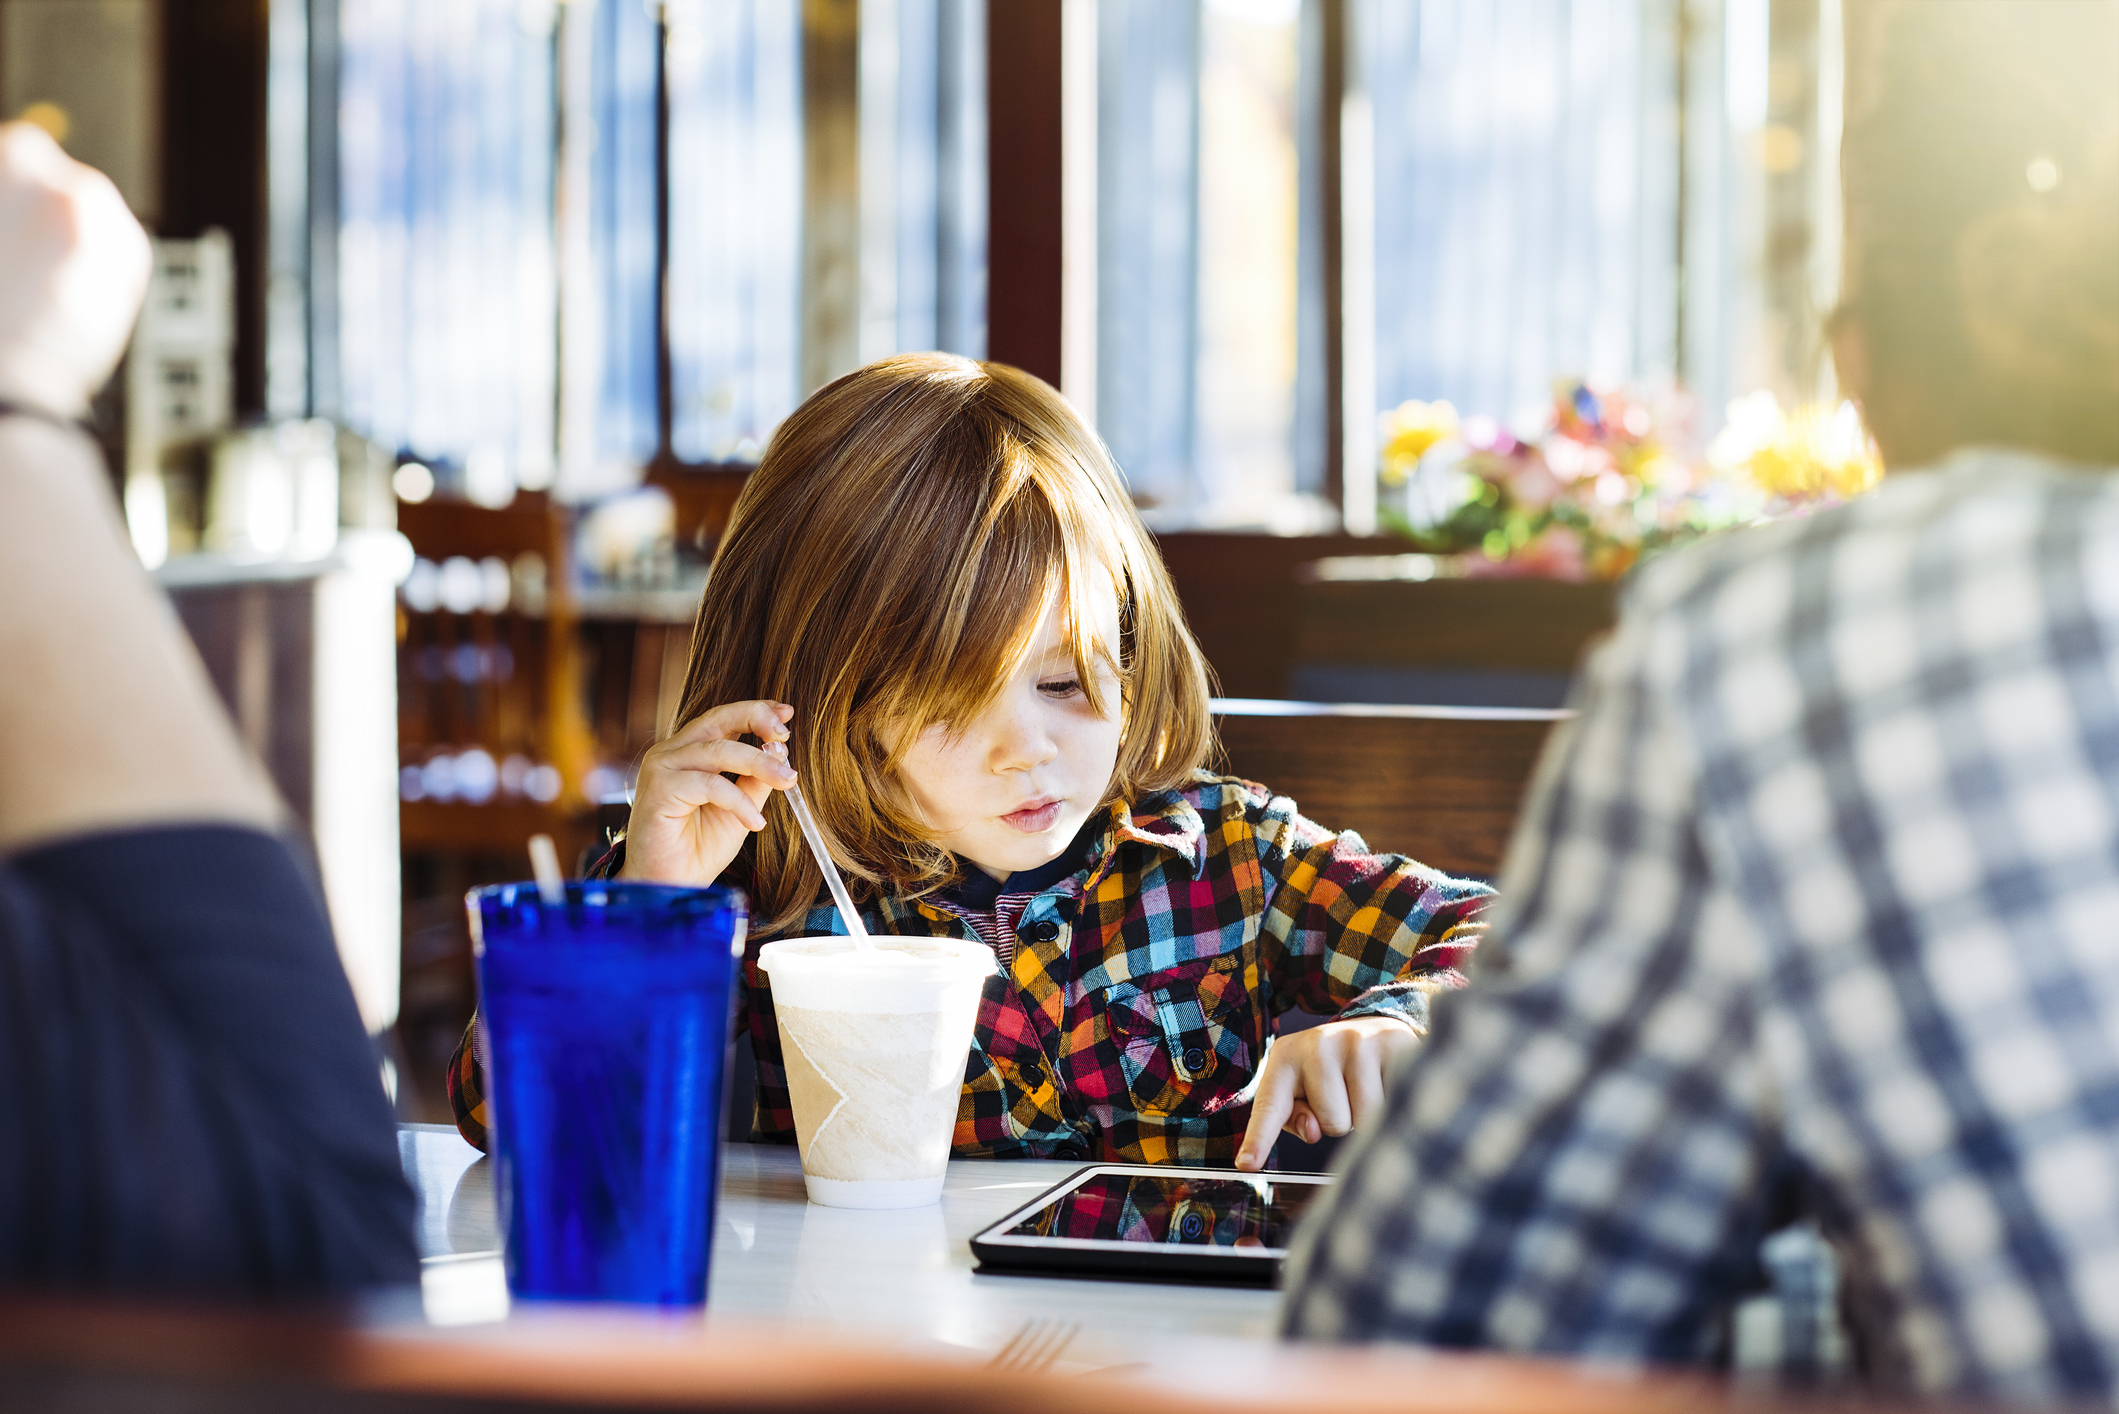 Child in plaid shirt focused on using a tablet at a restaurant table with an adult nearby